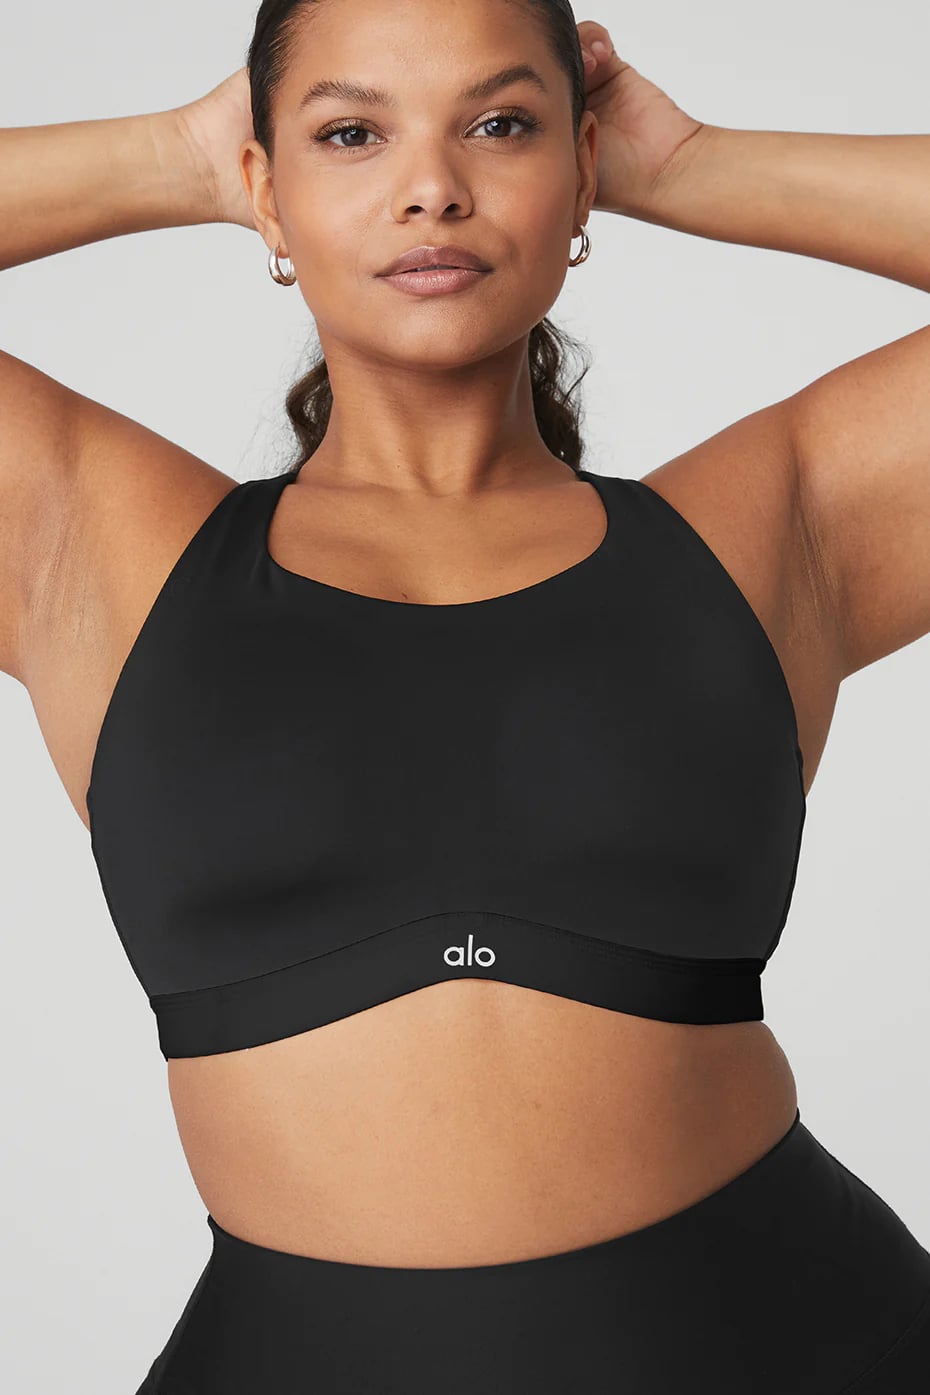 Alo Yoga Has So Many Bestsellers on Sale Right Now